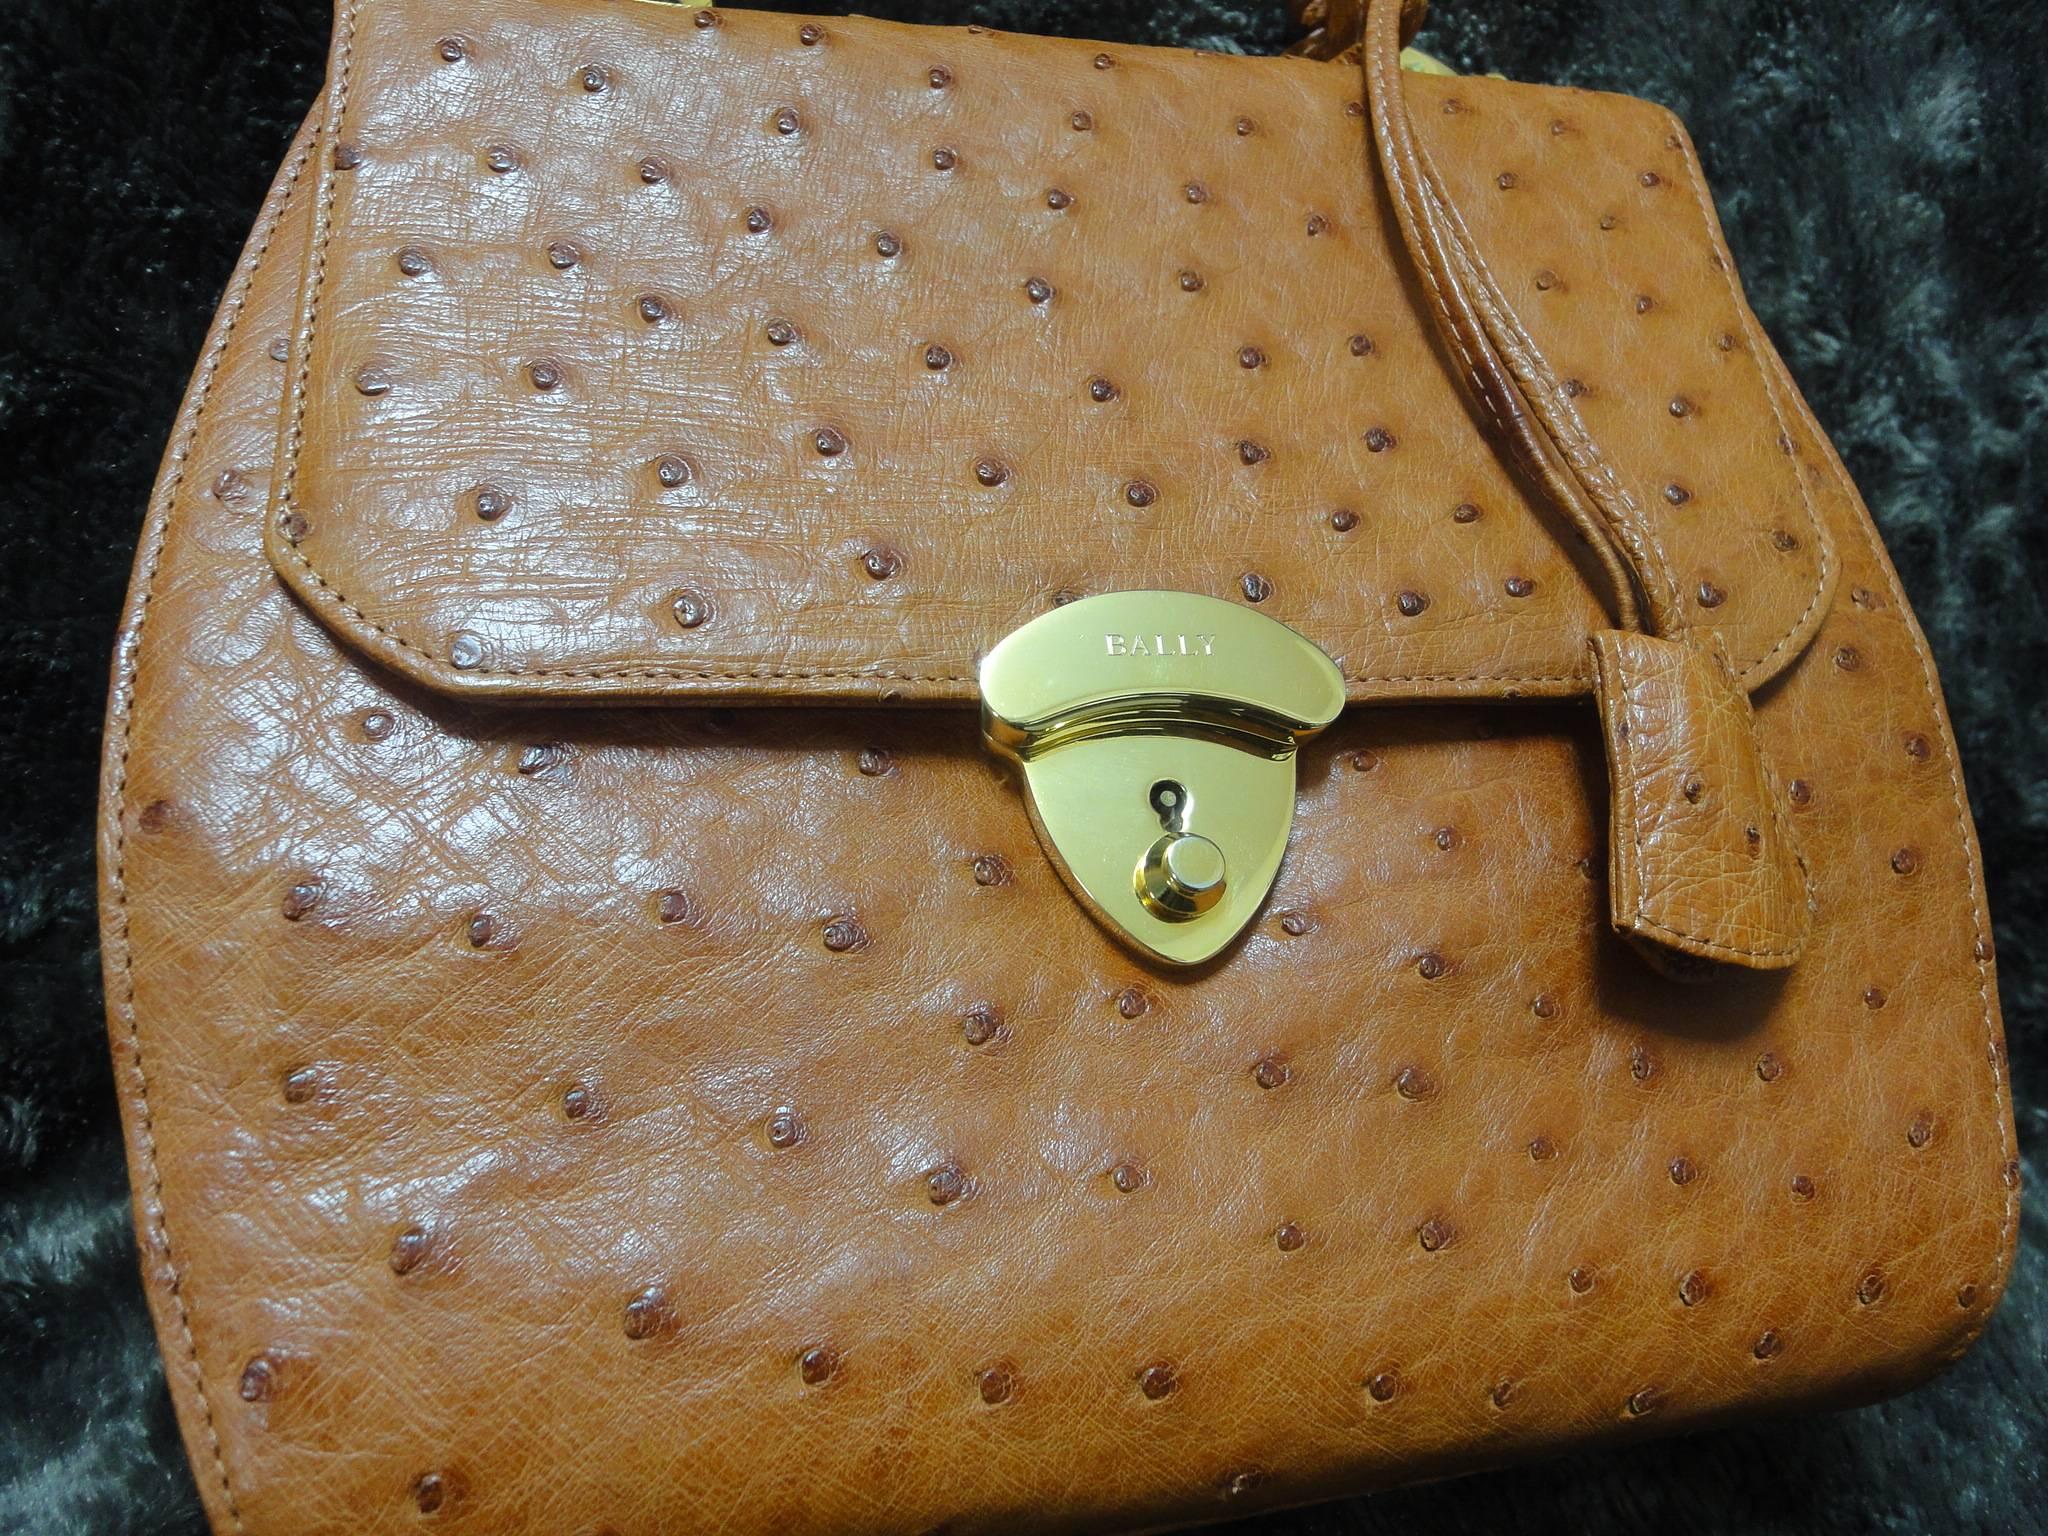 MINT. Vintage BALLY genuine ostrich leather orange brown handbag with shoulder strap and mirror.

This is a vintage Bally genuine ostrich leather shoulder bag in classic style from the early to mid 90s. Beautiful color!

Featuring the gold tone